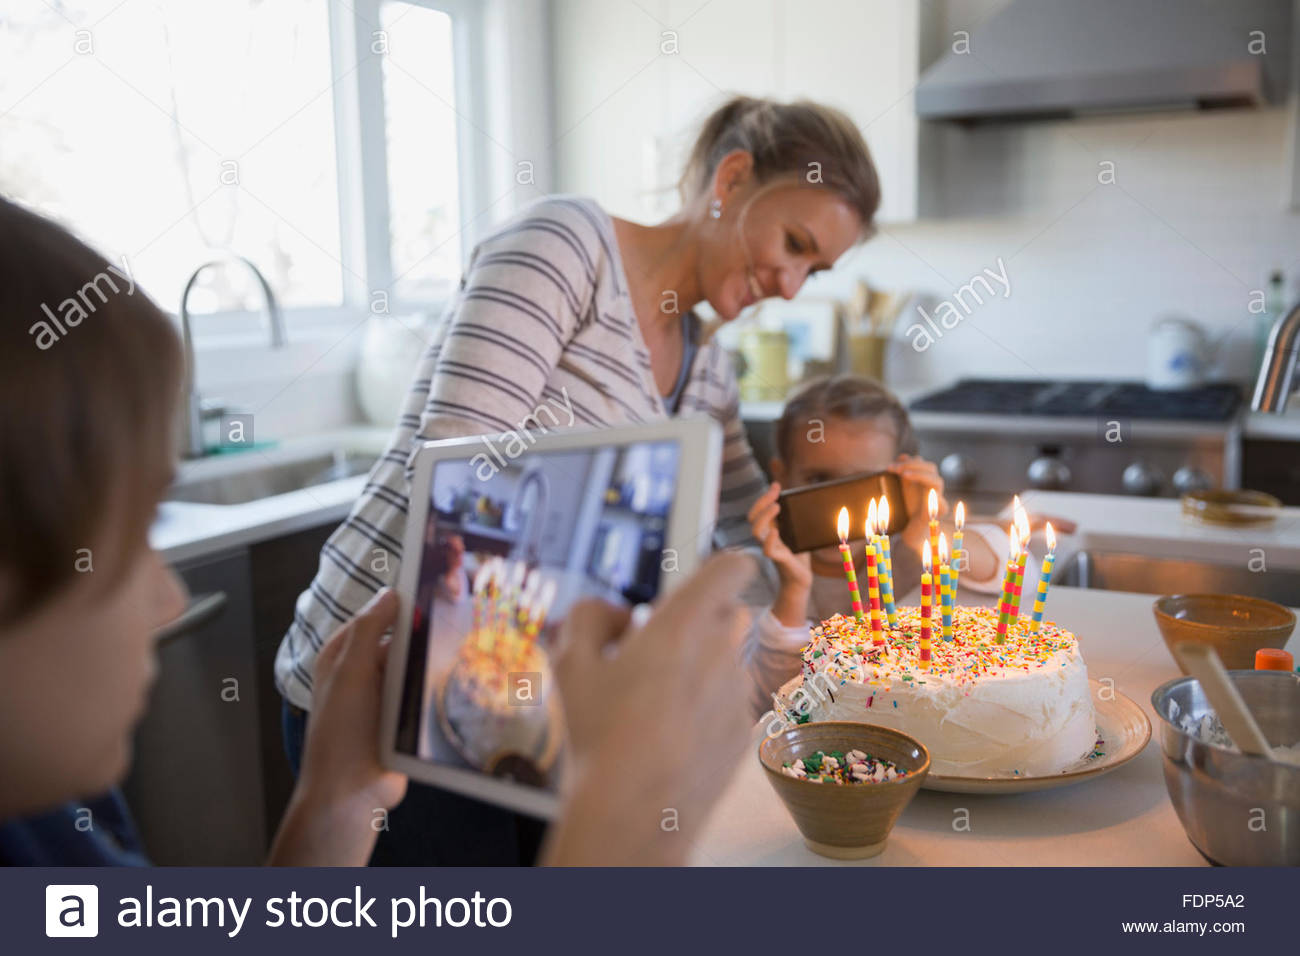 Mother and children photographing birthday cake with candles Stock Photo